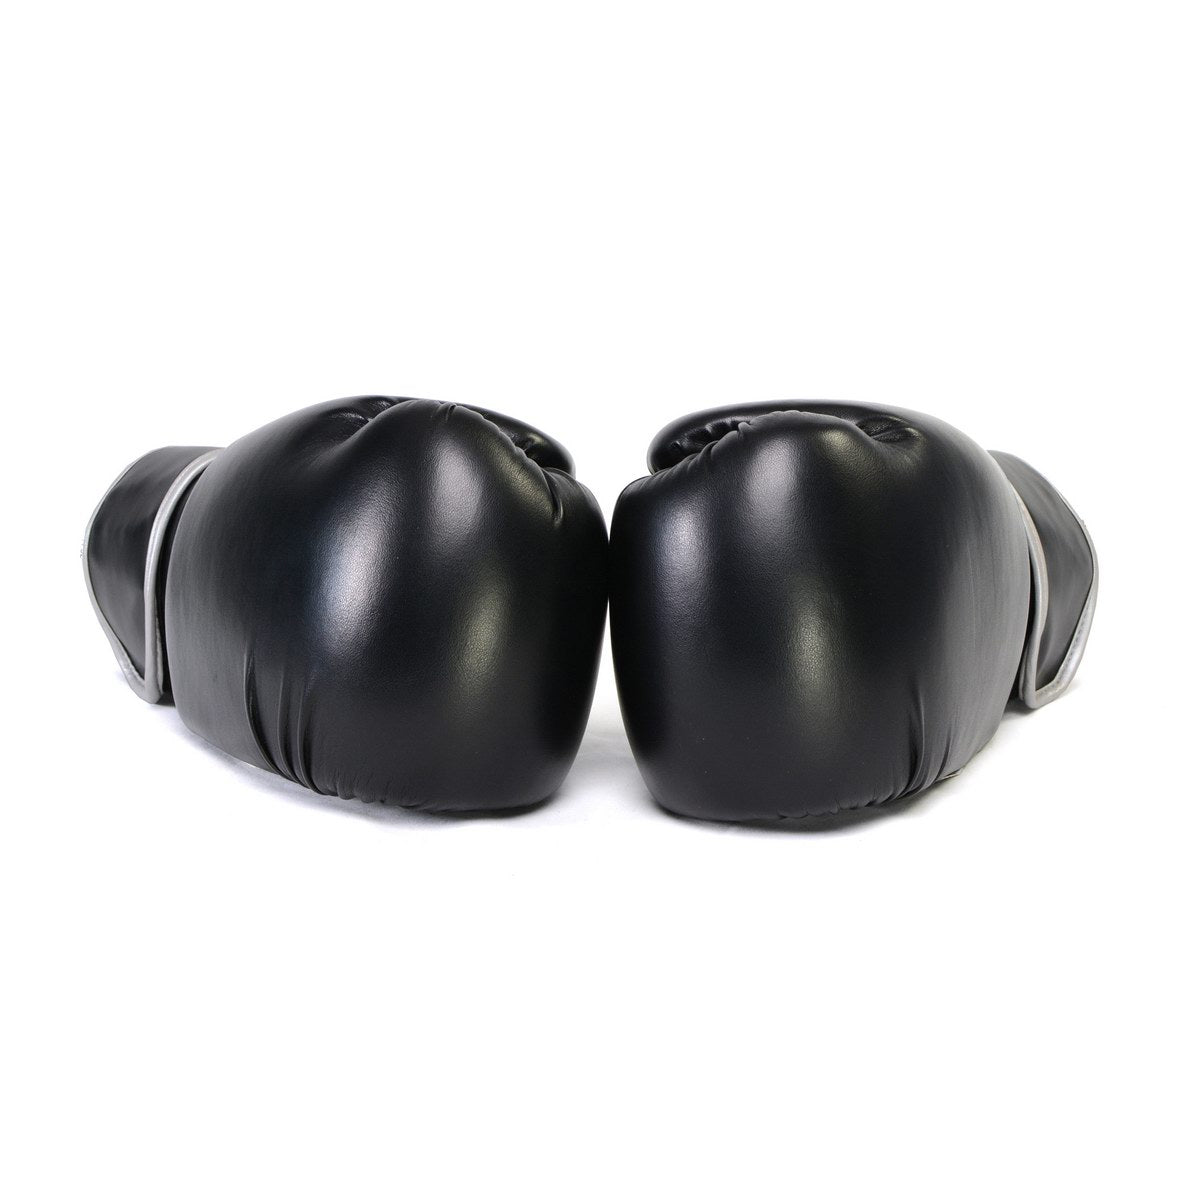 X-Fitness XF2000 Gel Boxing Kickboxing Punching Bag Gloves-BLK/SILVER